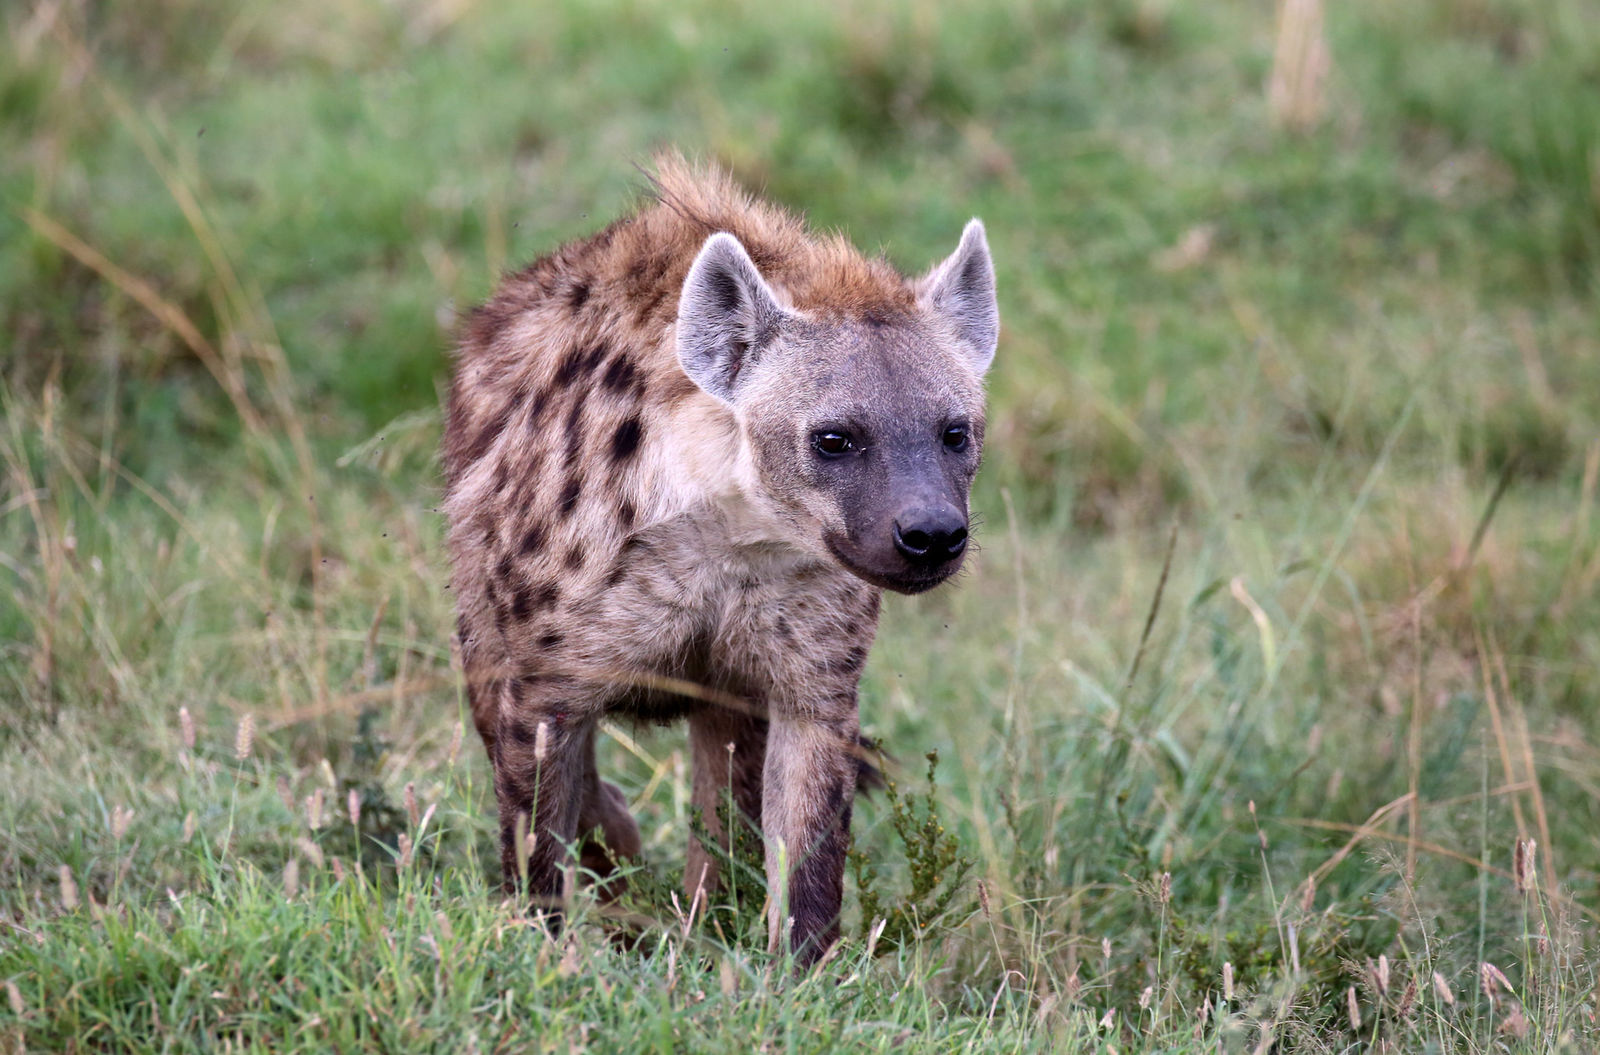 The spotted hyena